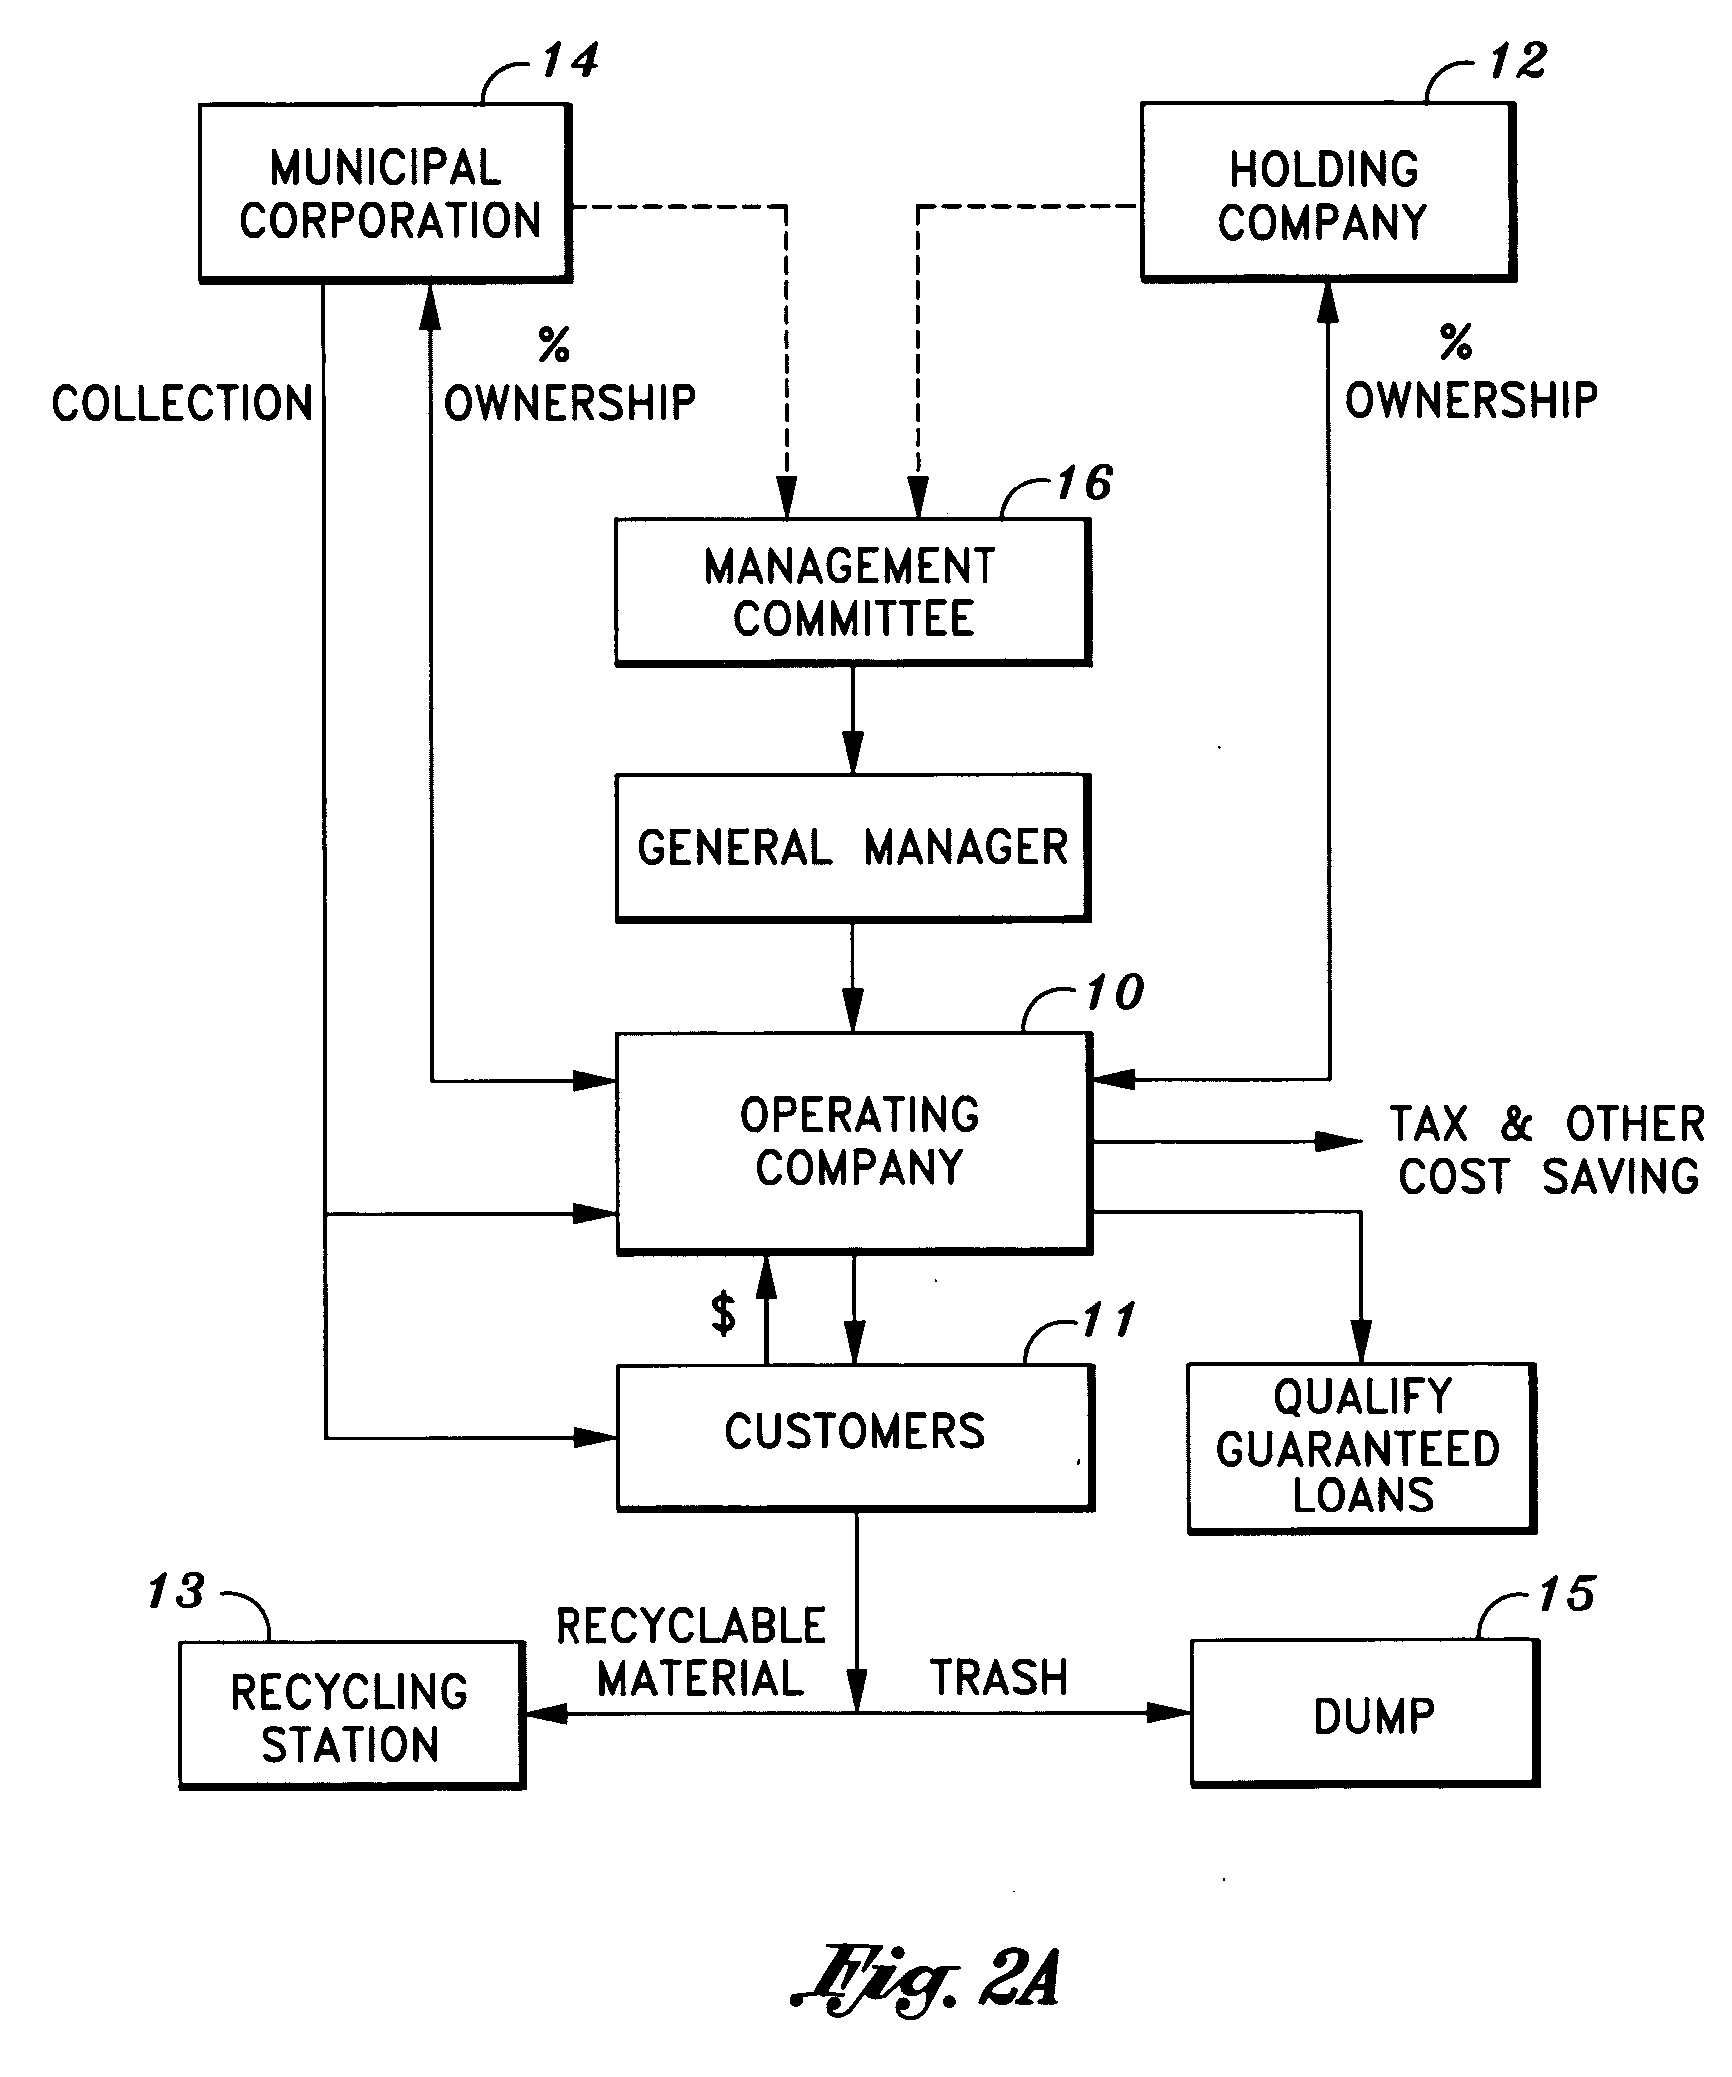 Method of conducting services on behalf of a governmental organization